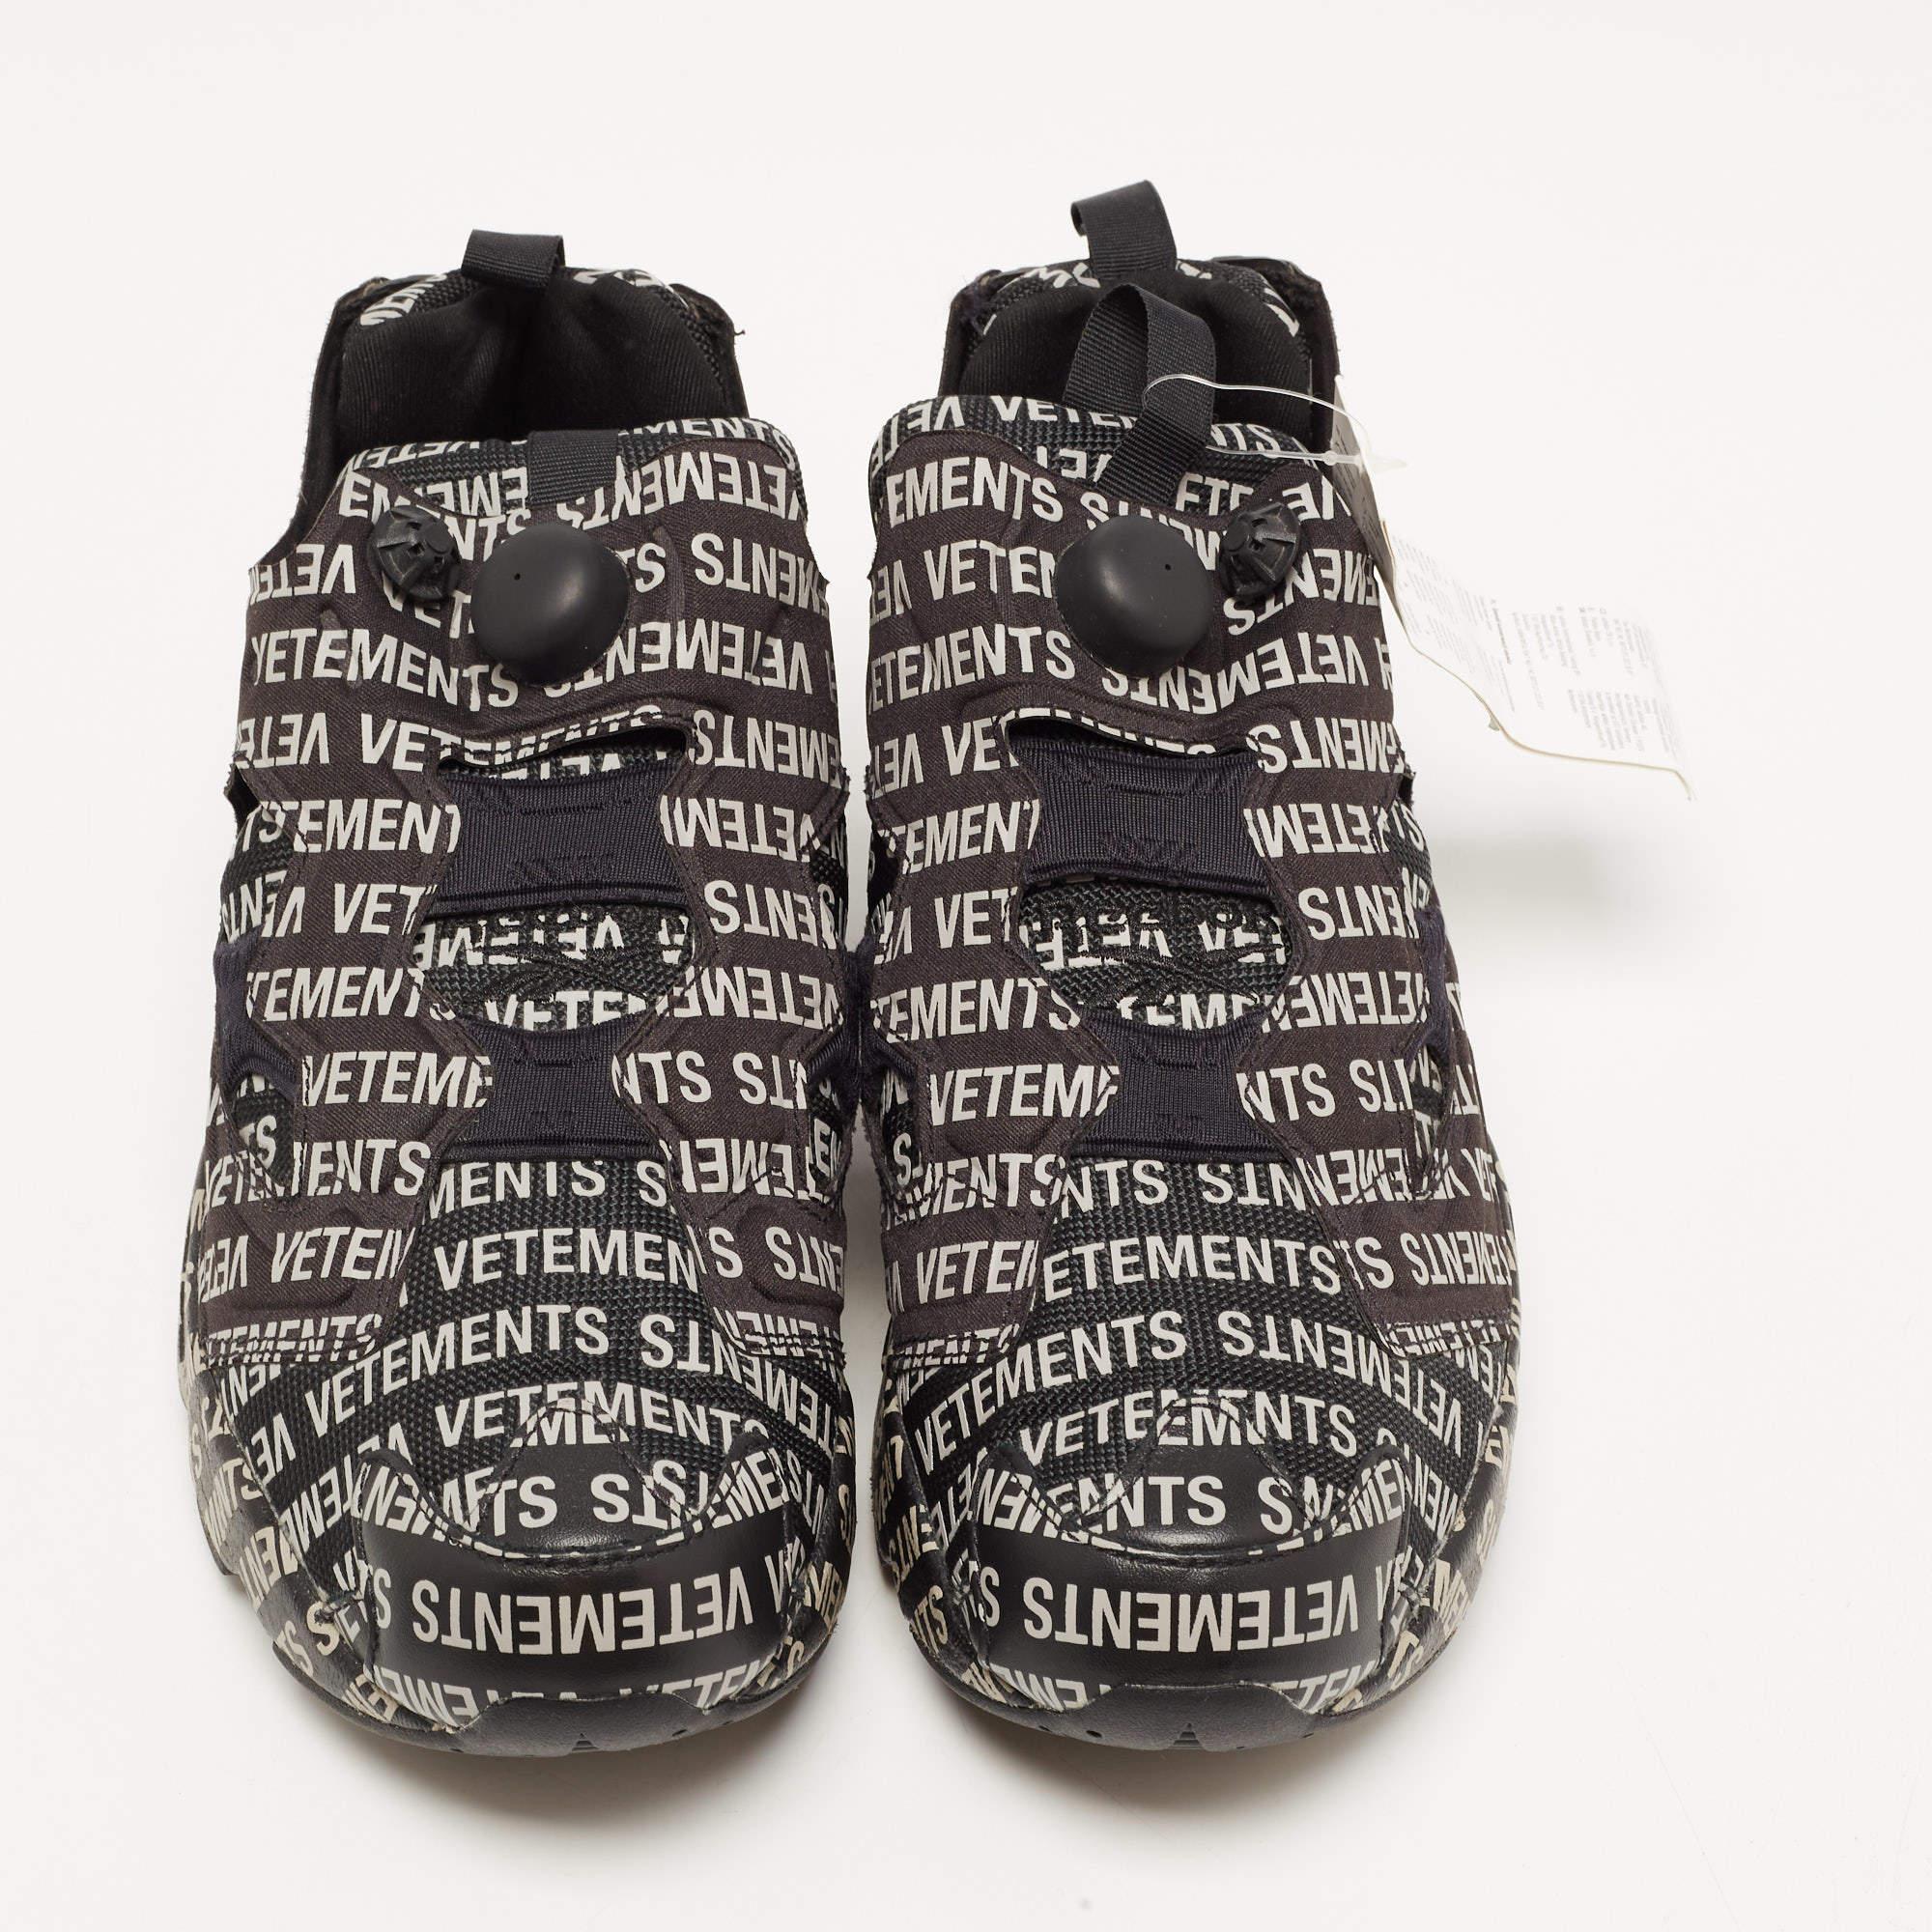 These sneakers are from the Vetements x Reebok collaboration, taking into account both the brand's aesthetics. The nylon and fabric construction features an all-over display of the Vetements logo on Reebok's Instapump Fury design. Comfortable